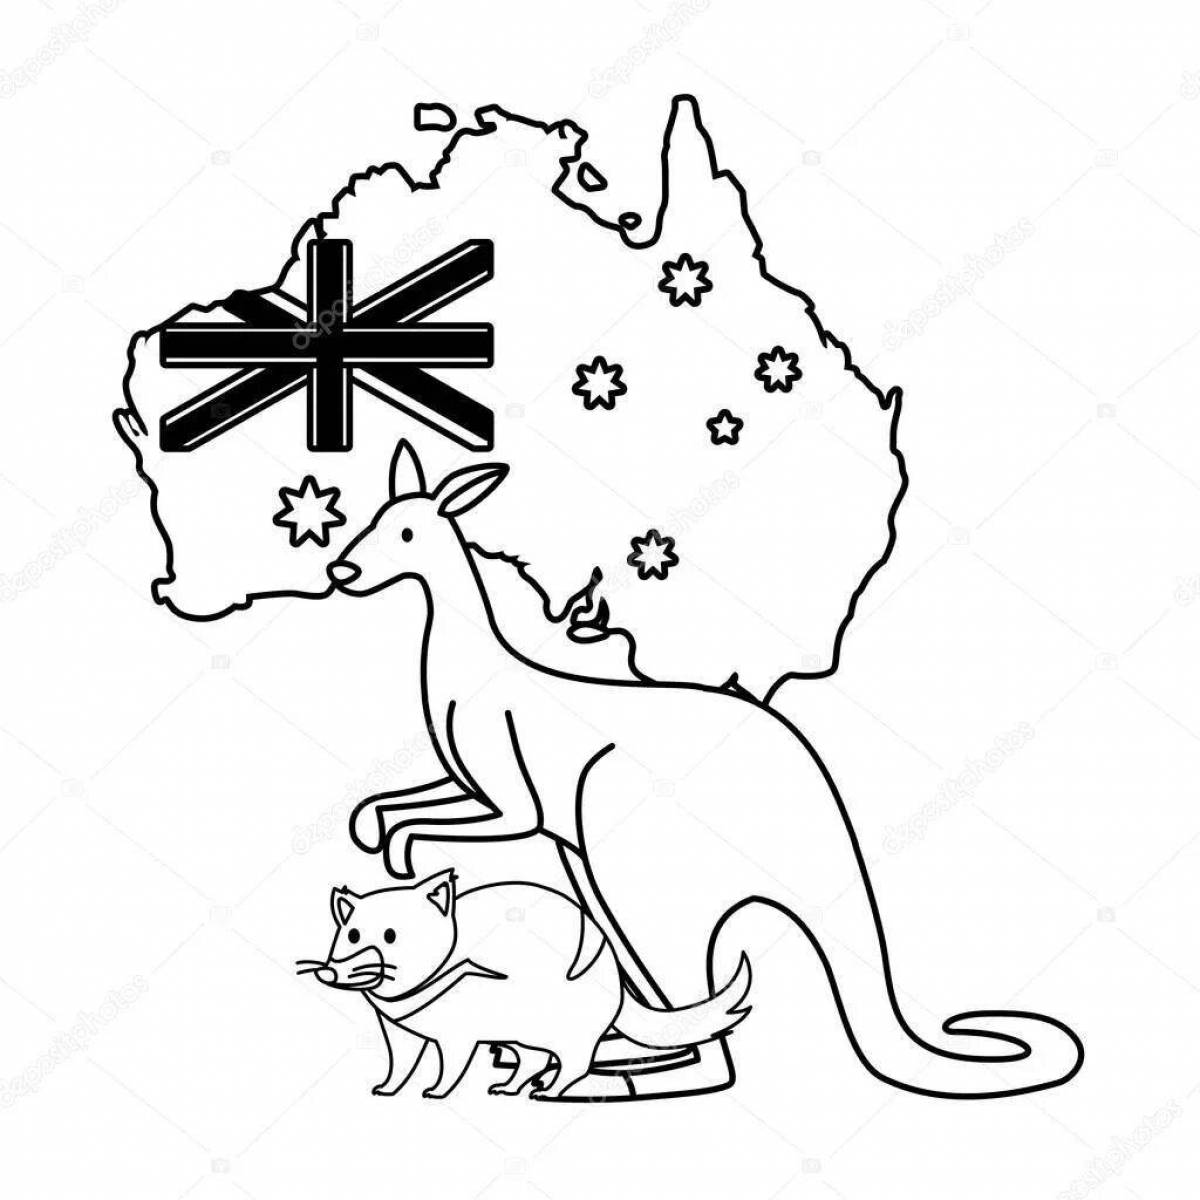 Australia's awesome coat of arms coloring page